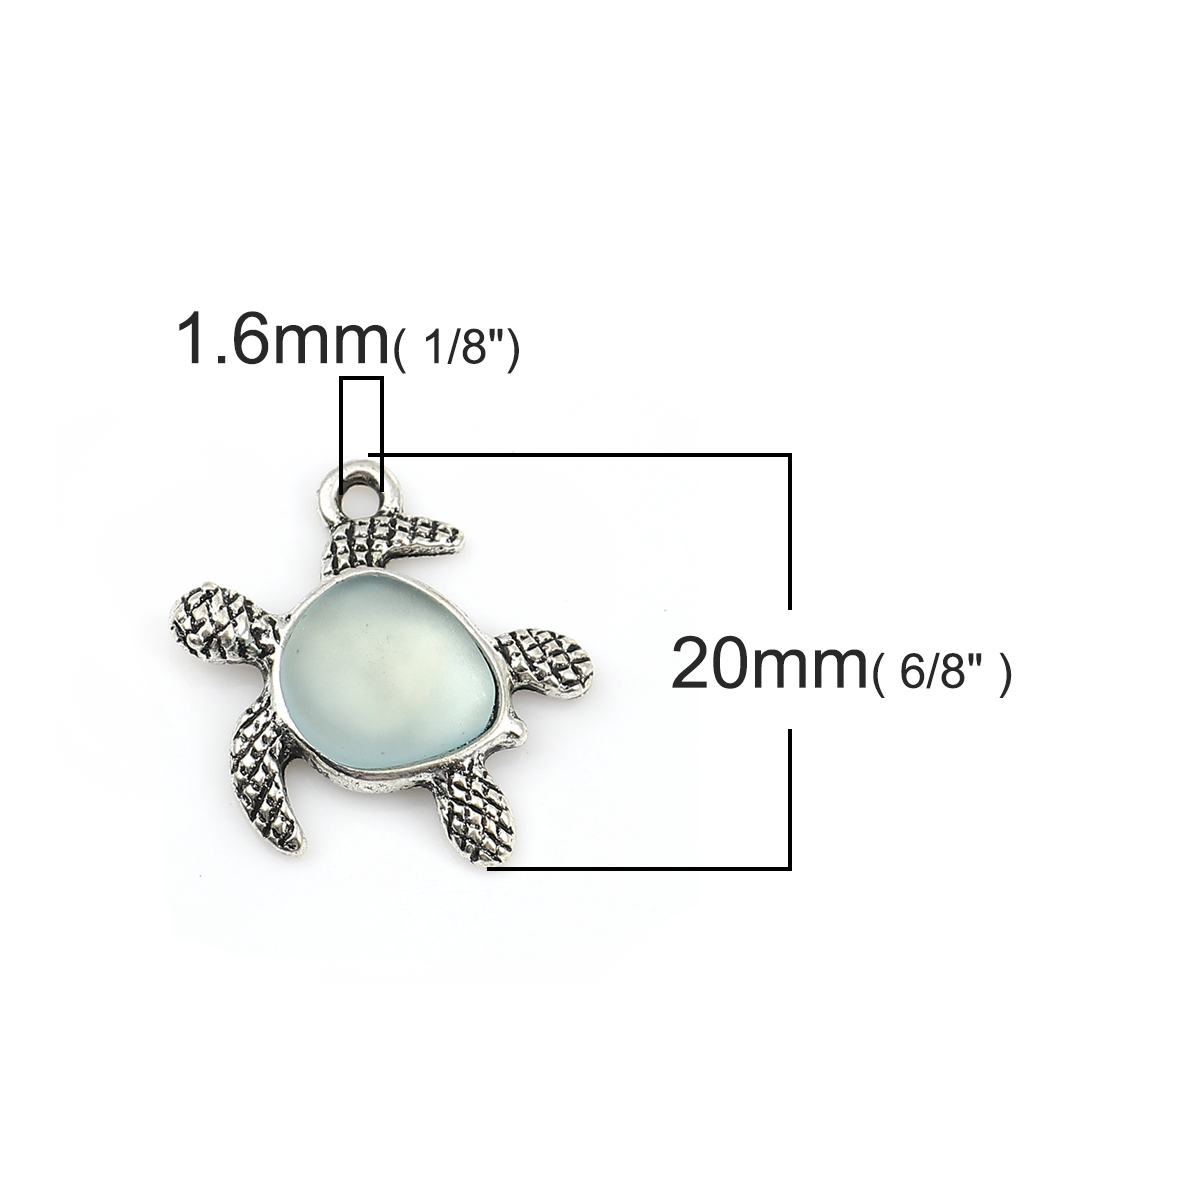 Picture of Zinc Based Alloy & Resin Ocean Jewelry Charms Sea Turtle Animal Antique Silver Light Blue 20mm( 6/8") x 19mm( 6/8"), 5 PCs